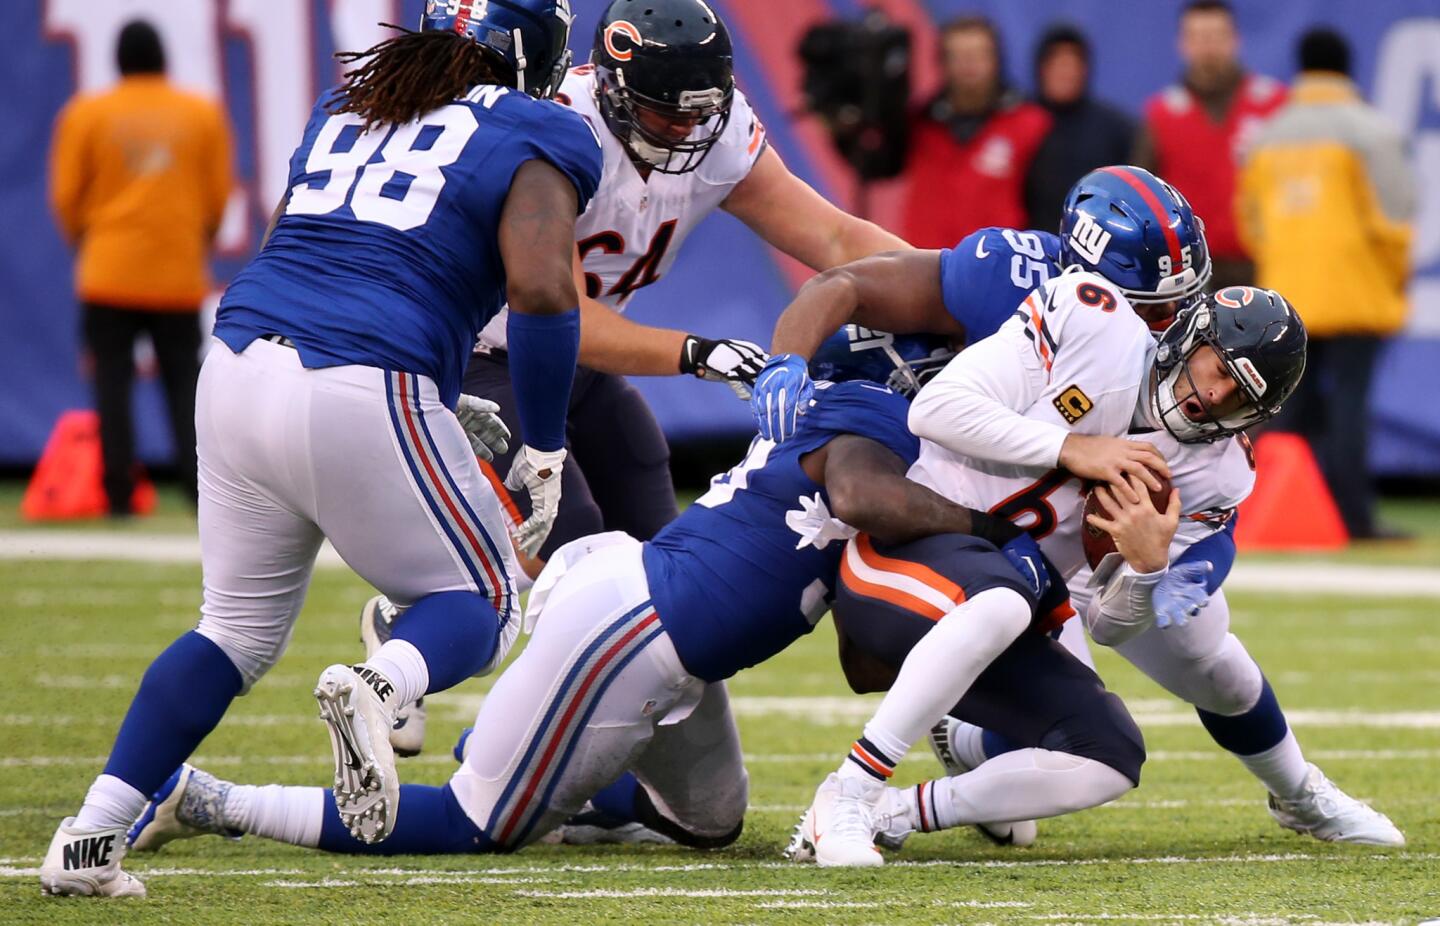 Jay Cutler is sacked in the fourth quarter against the Giants at MetLife Stadium on Nov. 20, 2016.